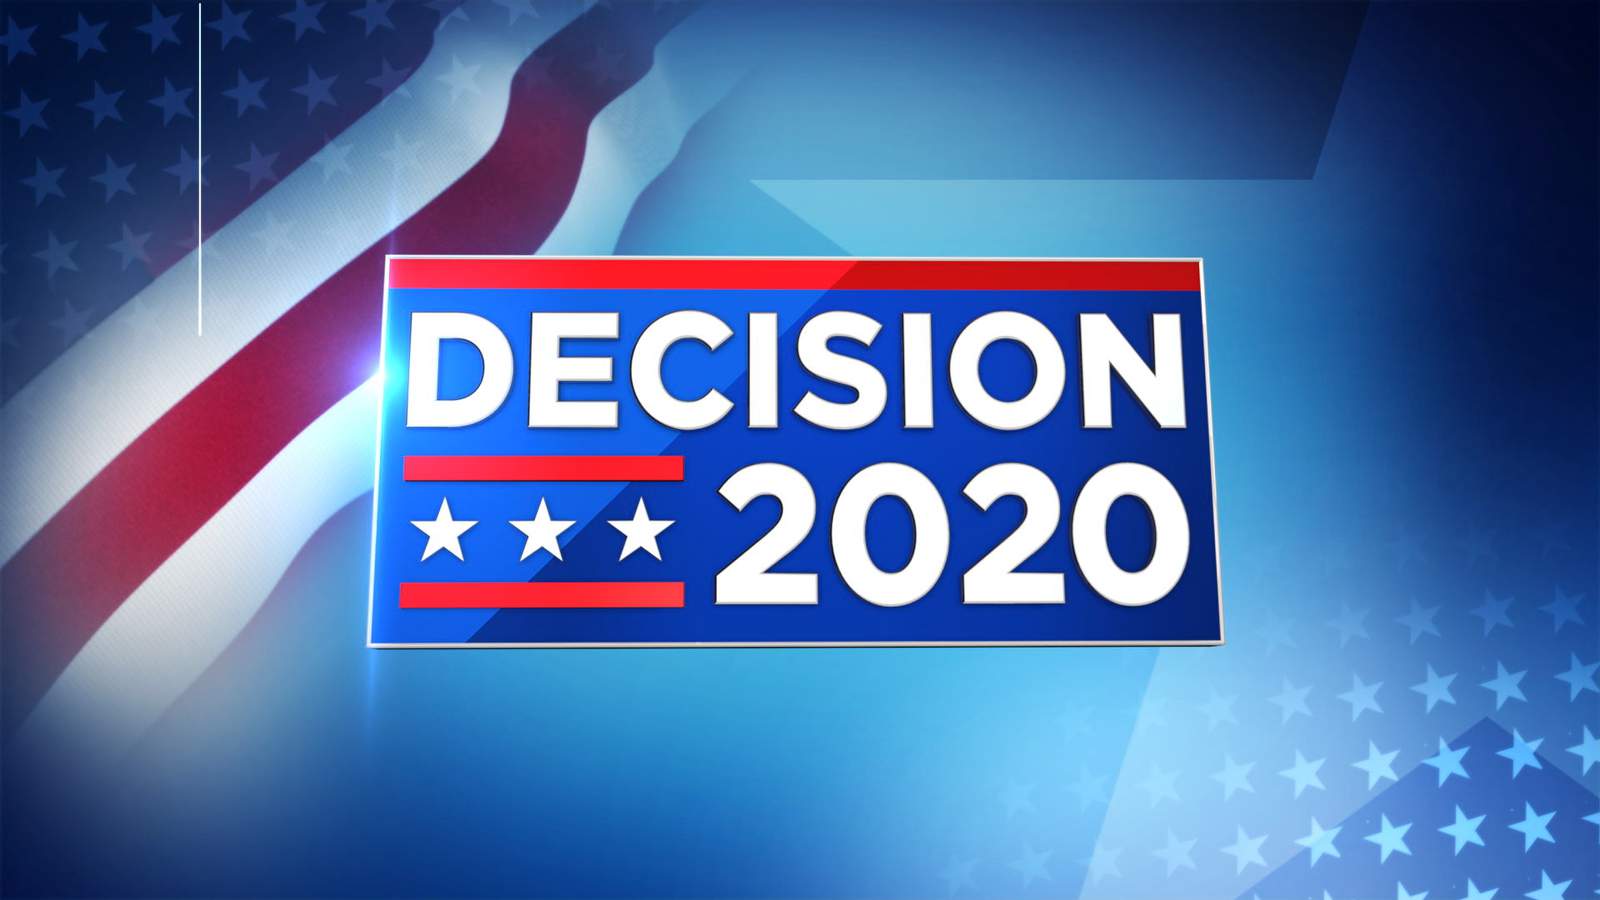 Democratic Presidential Primary Election Results for Accomack County on March 3, 2020